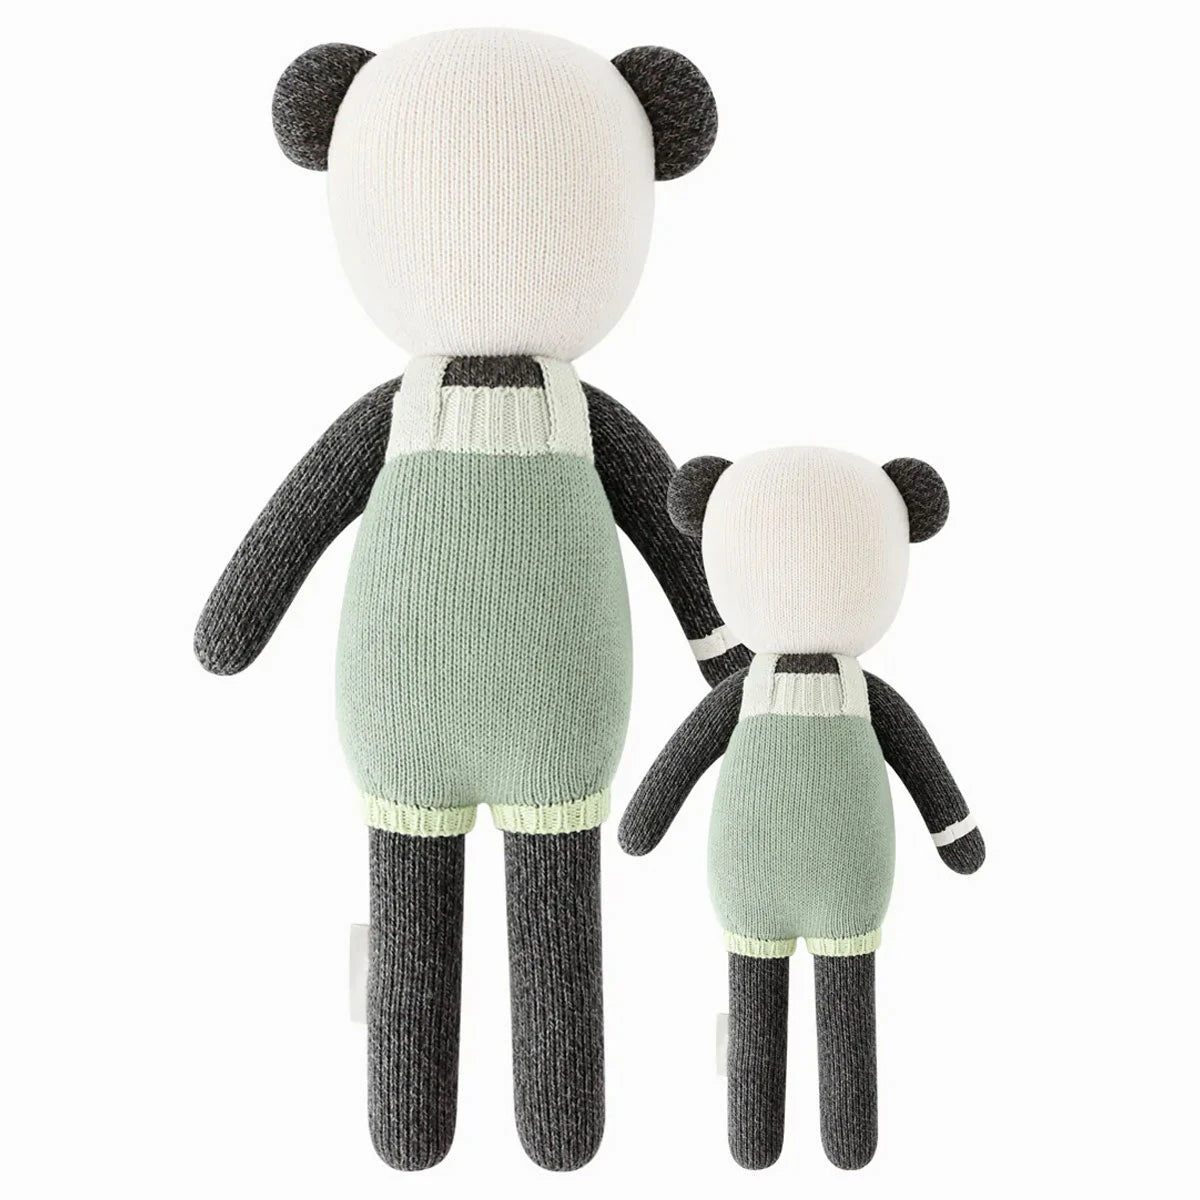 cuddle + kind Hand-Knit Doll - Paxton the Panda